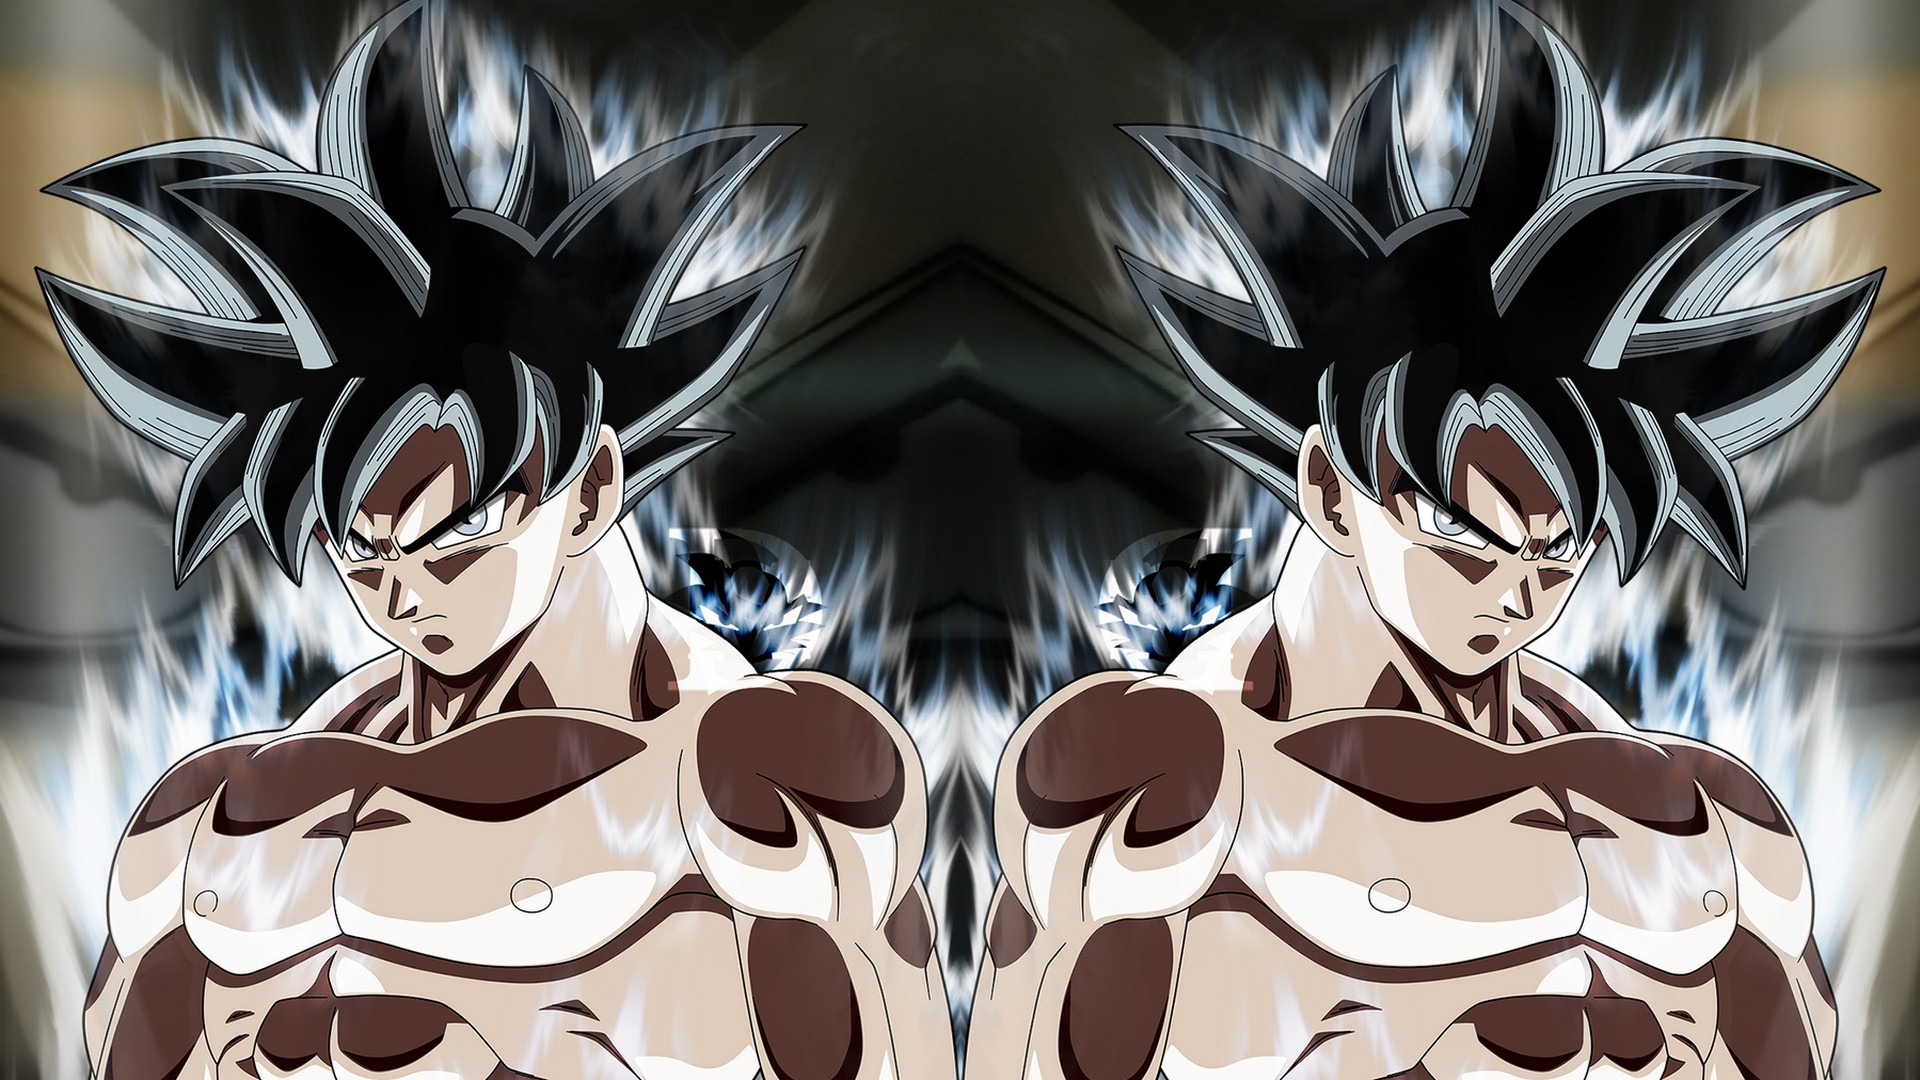 Wallpapers Goku Images With Resolution 1920X1080 pixel. You can make this wallpaper for your Desktop Computer Backgrounds, Mac Wallpapers, Android Lock screen or iPhone Screensavers